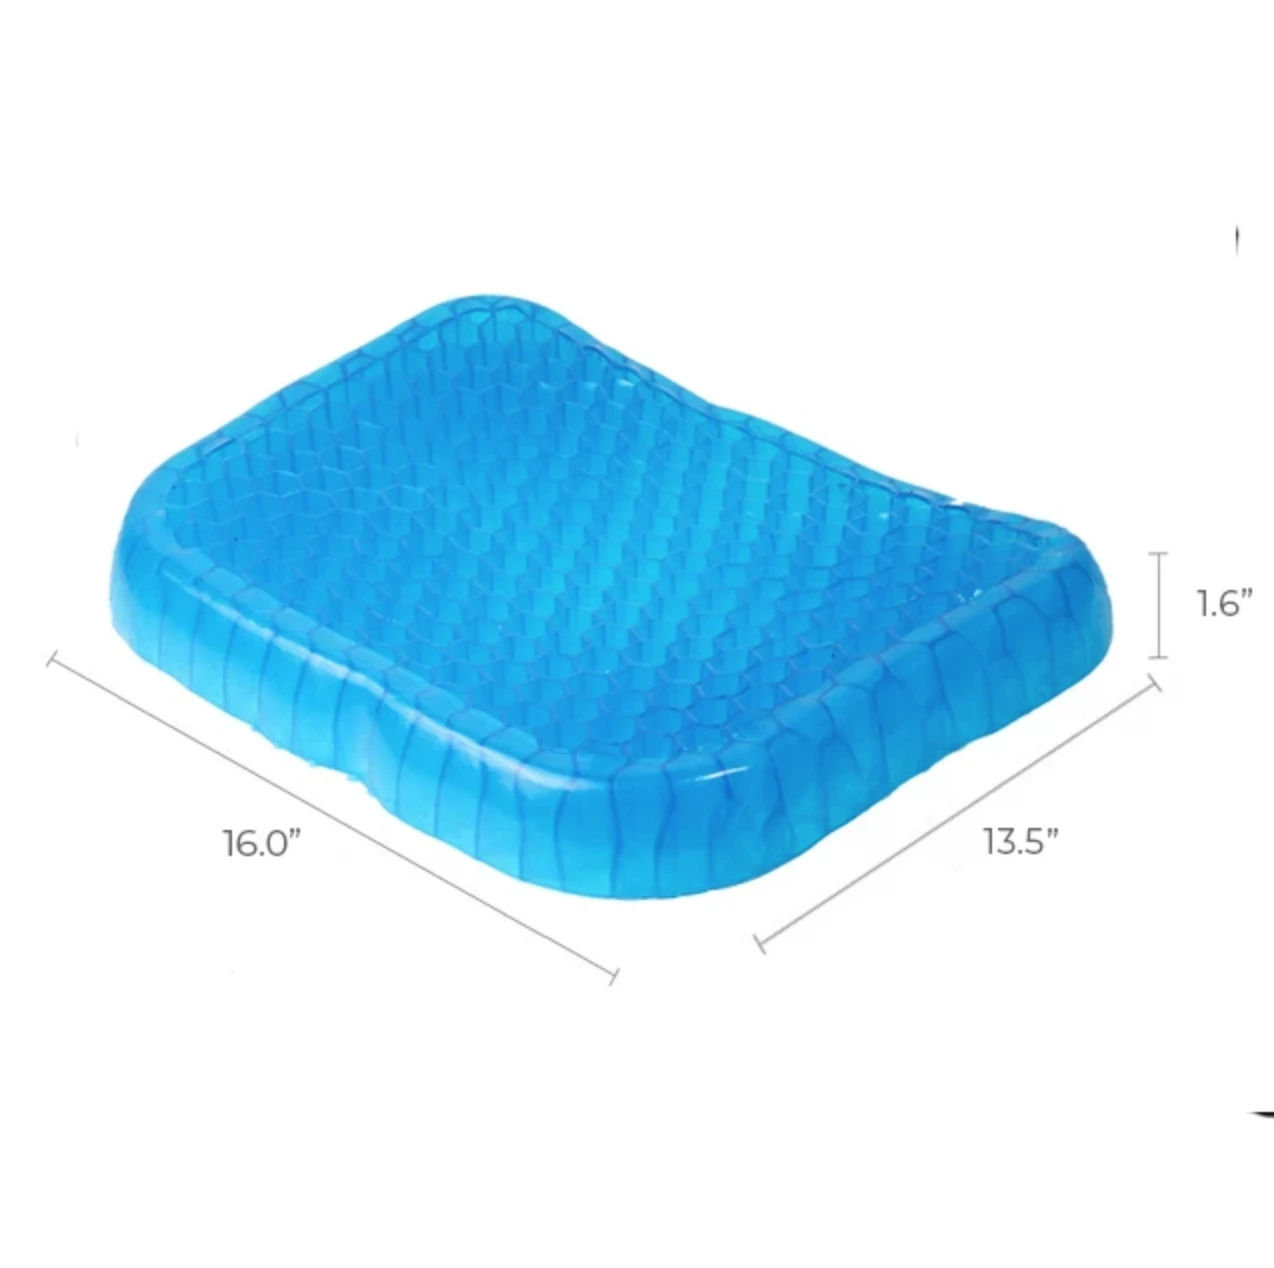 Premium Seat Cushion For Back Pain (50% OFF)